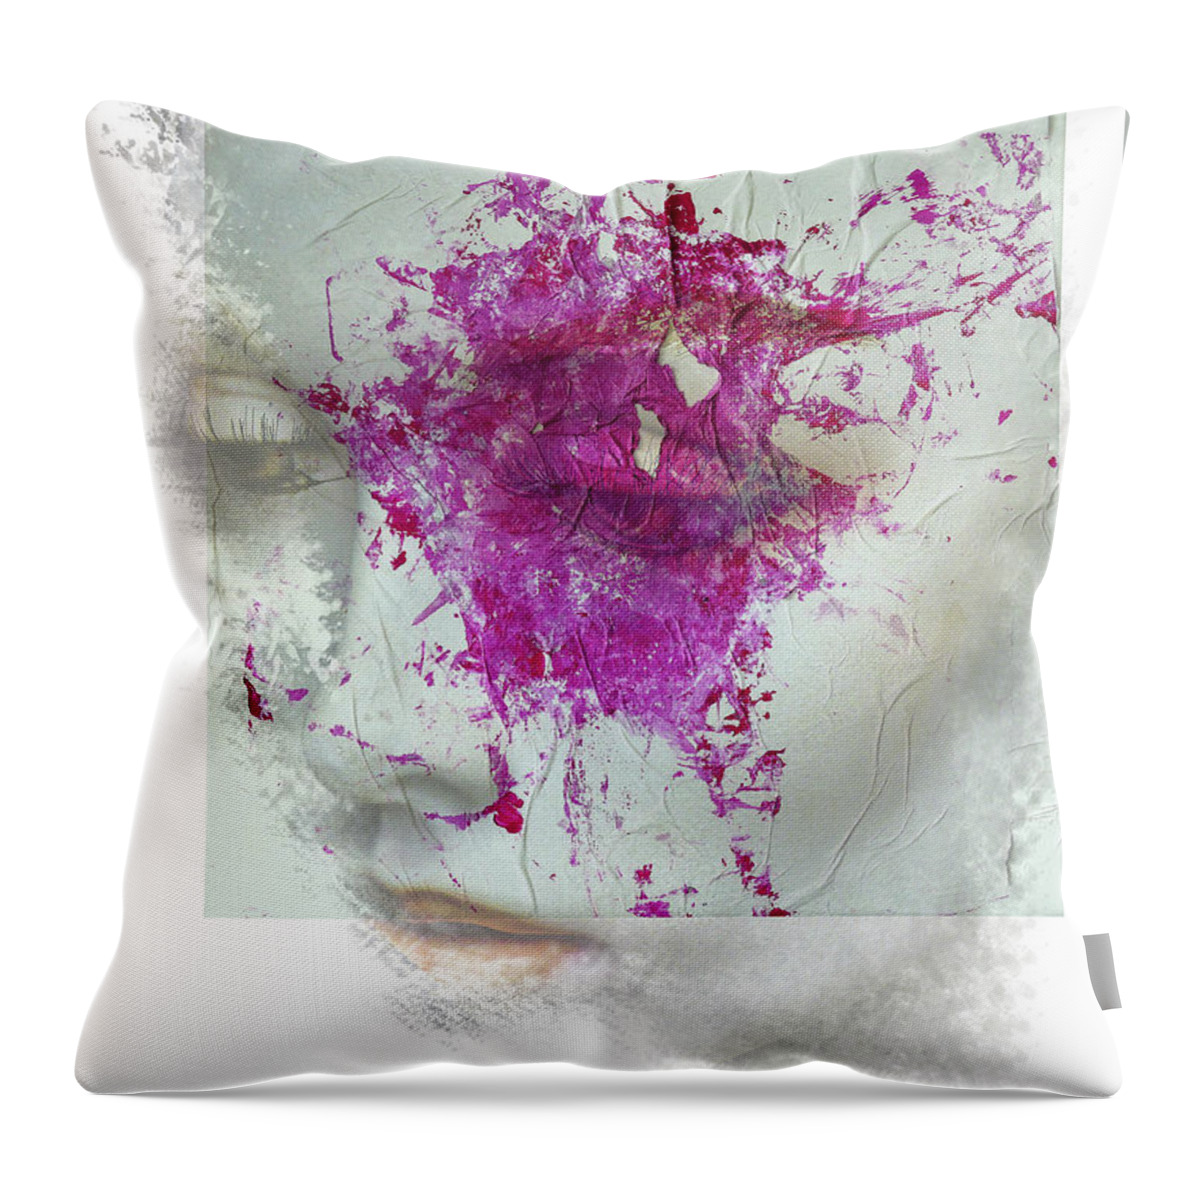 Woman Throw Pillow featuring the digital art The woman with the pink splash by Gabi Hampe